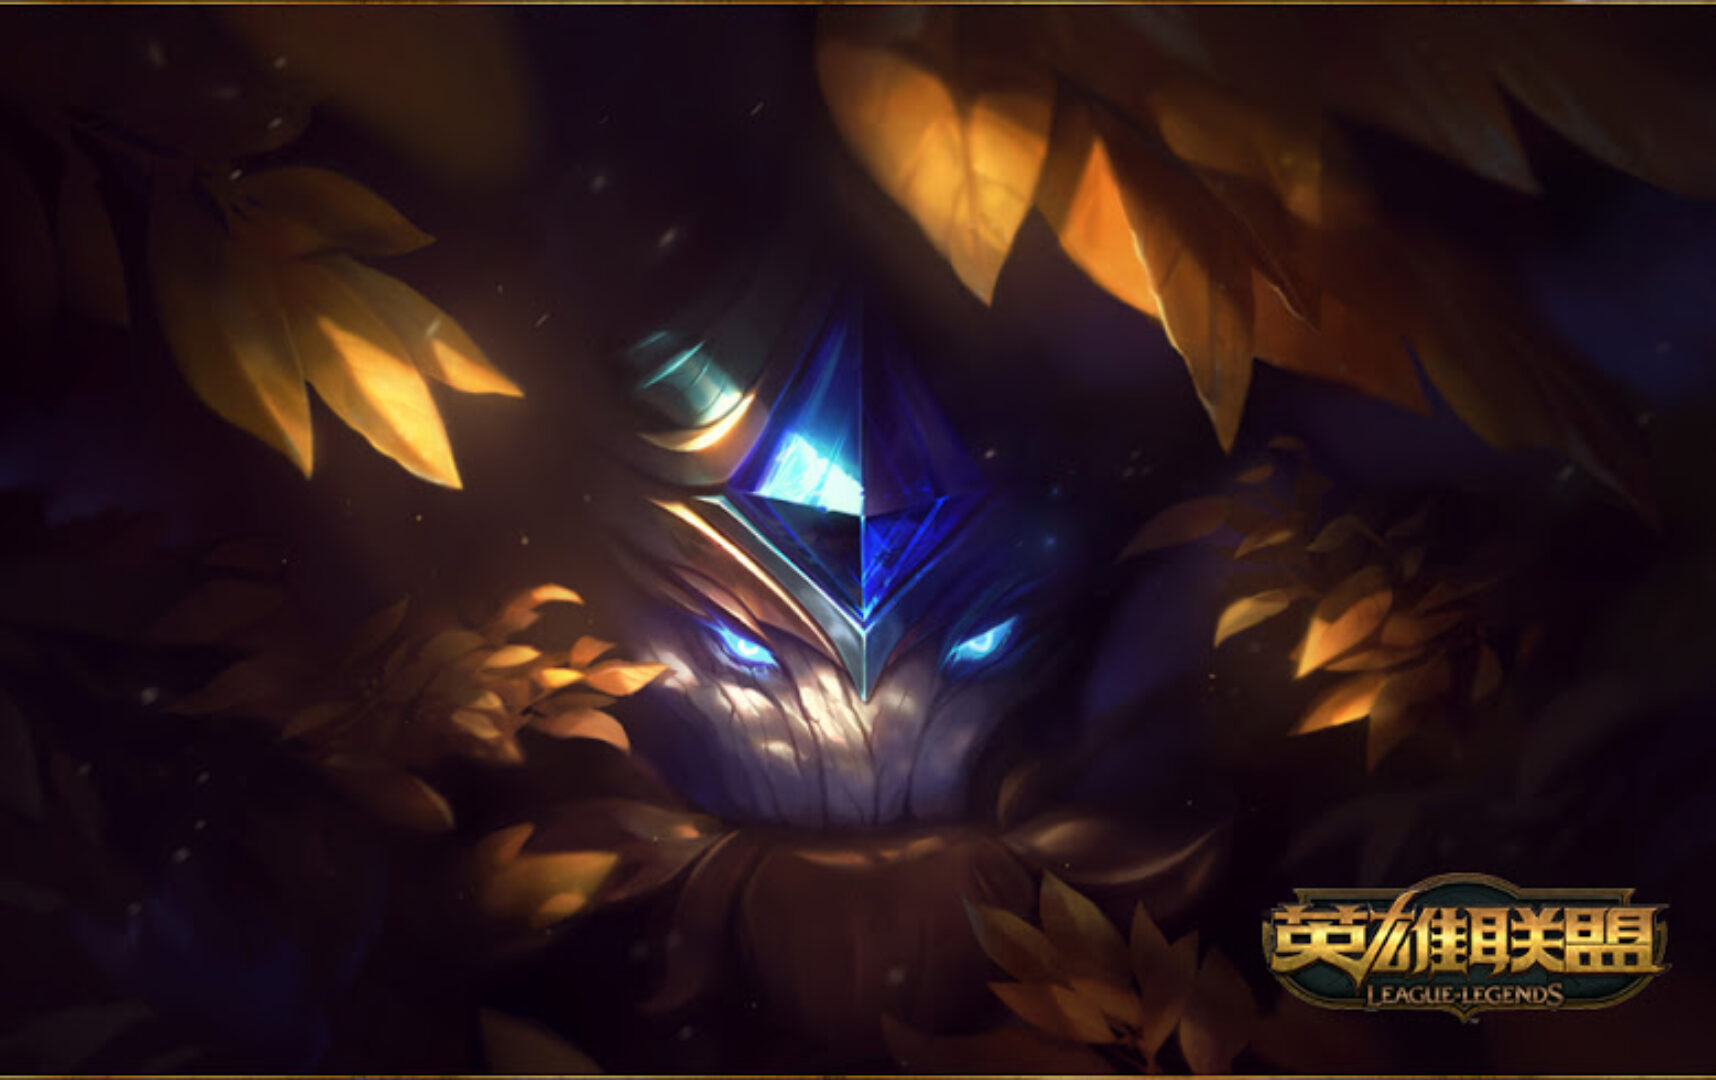 Victorious Maokai Announced for League of Legends